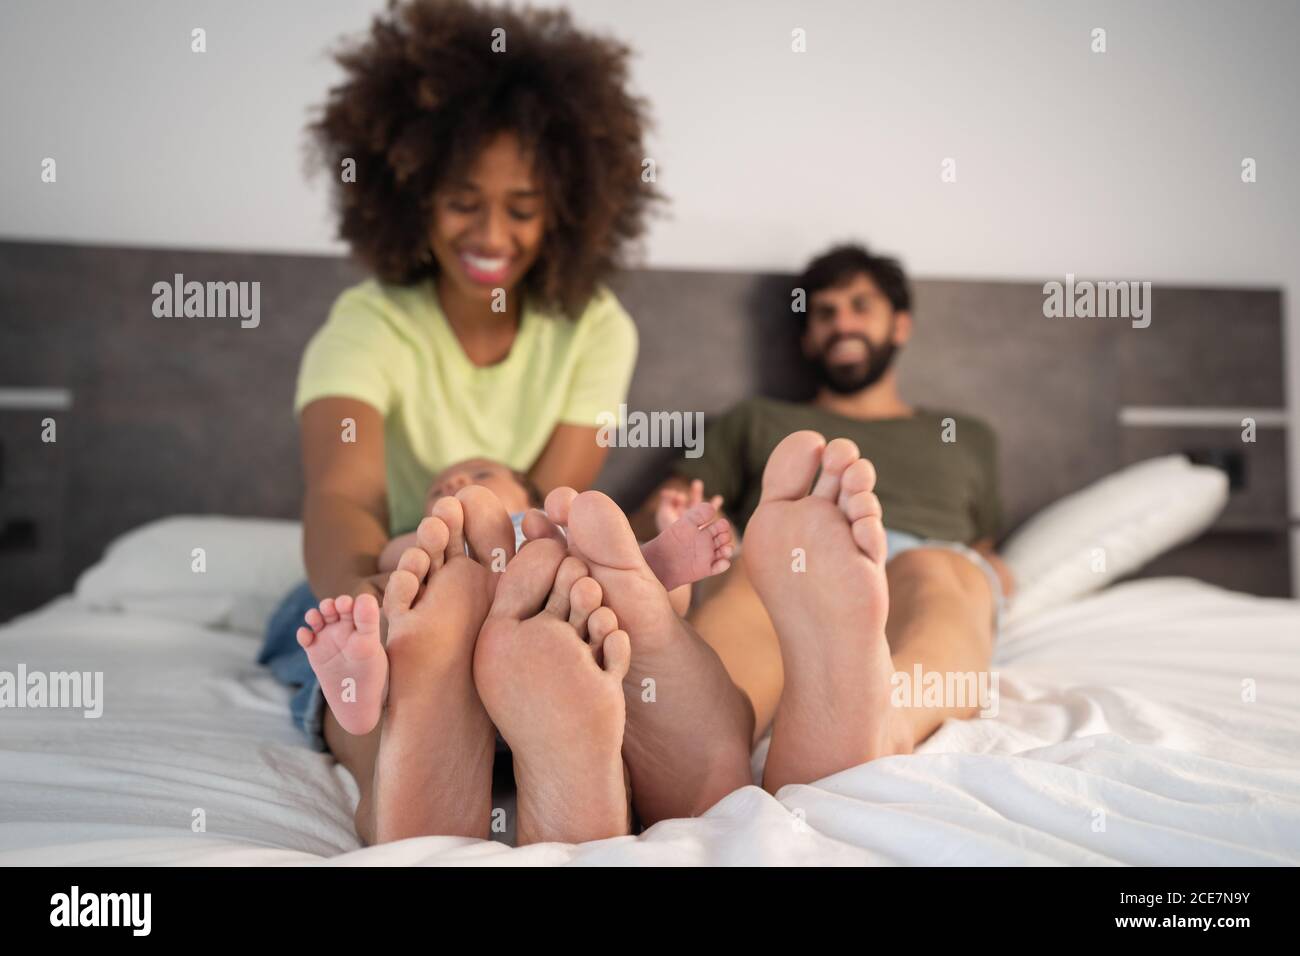 Content multiracial barefoot mother and father lying on bed with cute baby while enjoying weekend together Stock Photo